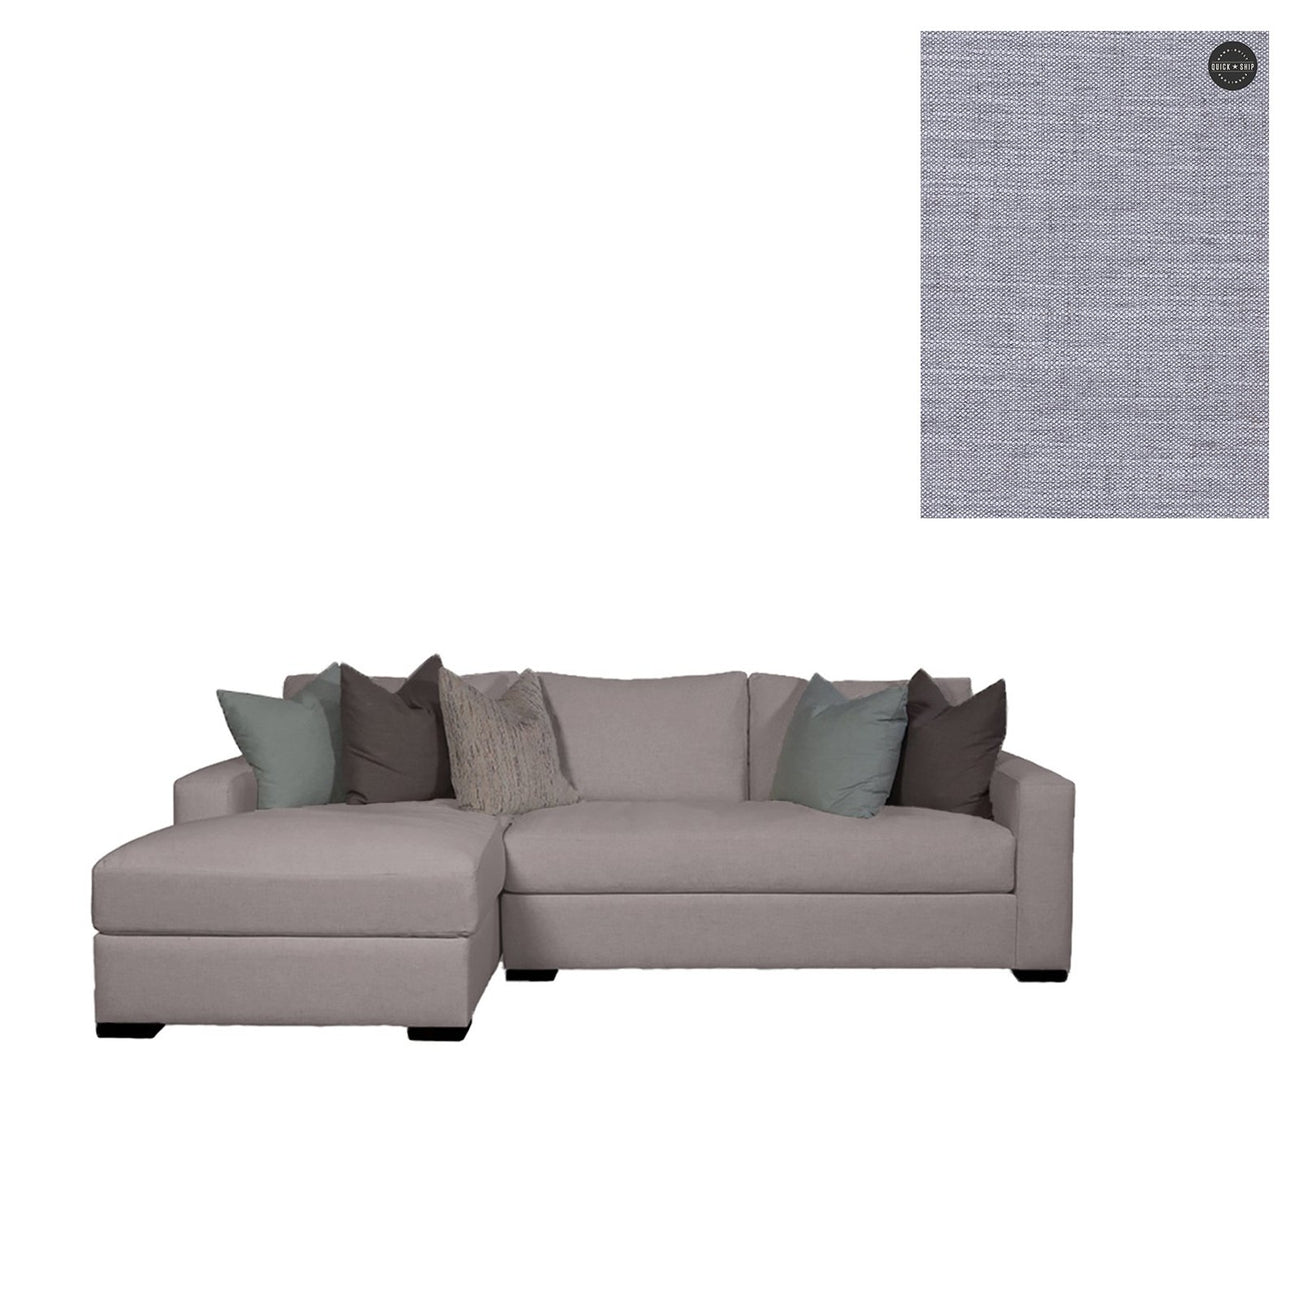 Gia Sectional-Younger-YNGR-49537-49561-2805-SC-SectionalsRight Arm Facing Chaise-Standard Cushion-Polyester/Linen-2805-34-France and Son